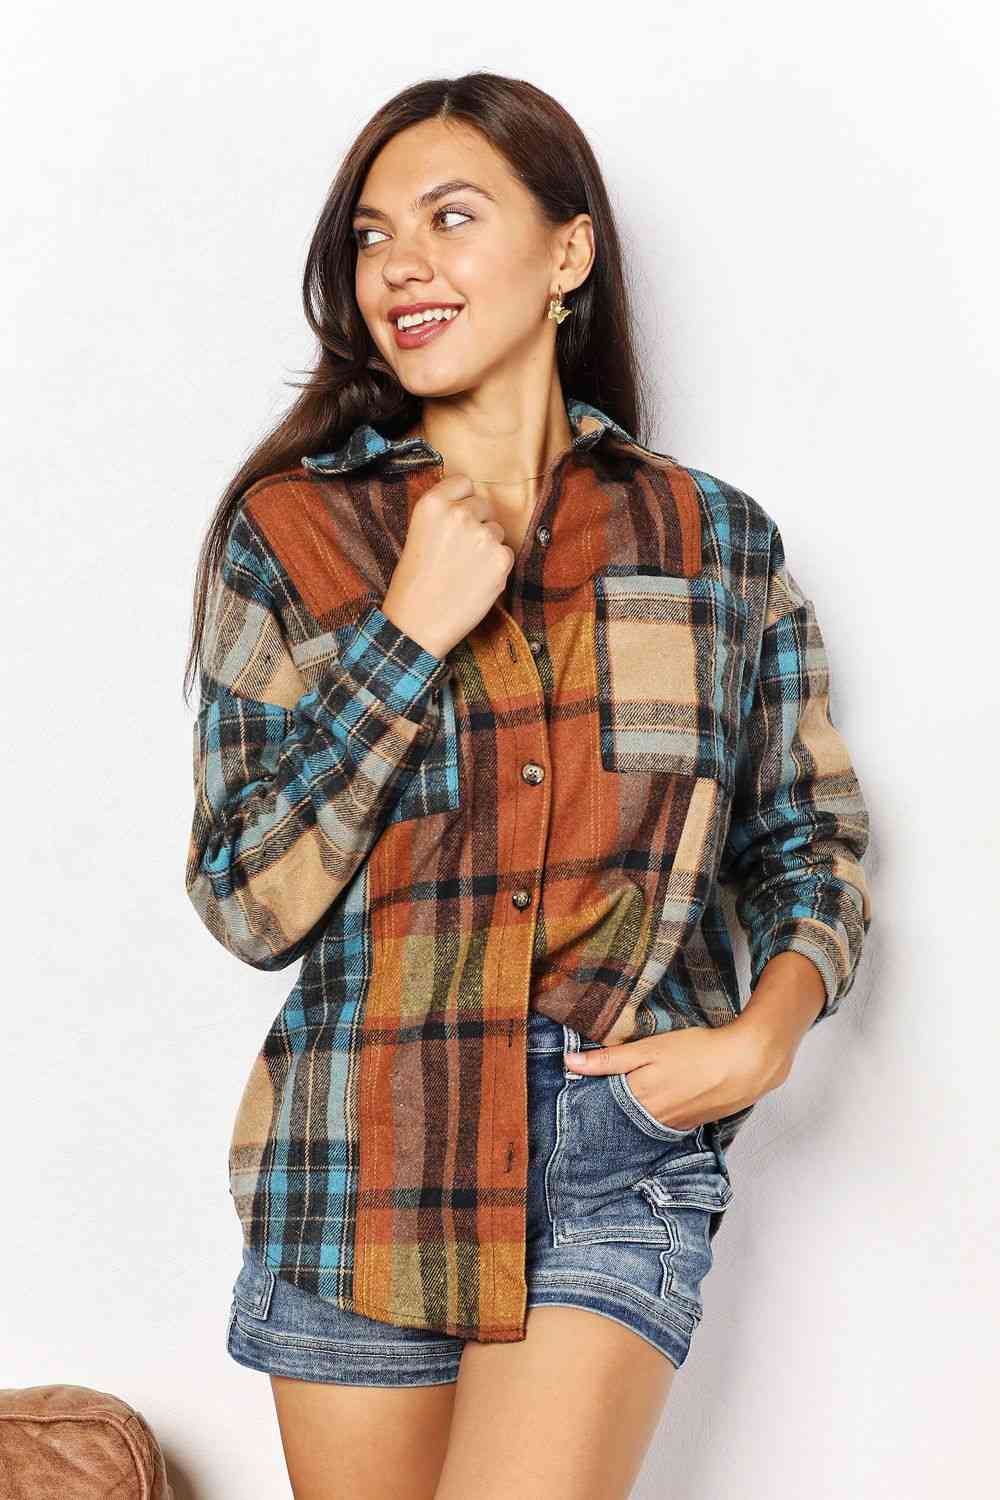 "Image: A stylish Double Take Plaid Curved Hem Shirt Jacket featuring breast pockets. The jacket showcases a classic plaid pattern, with a curved hem design for a modern and fashionable look. The breast pockets add functional detail, combining comfort and style seamlessly."